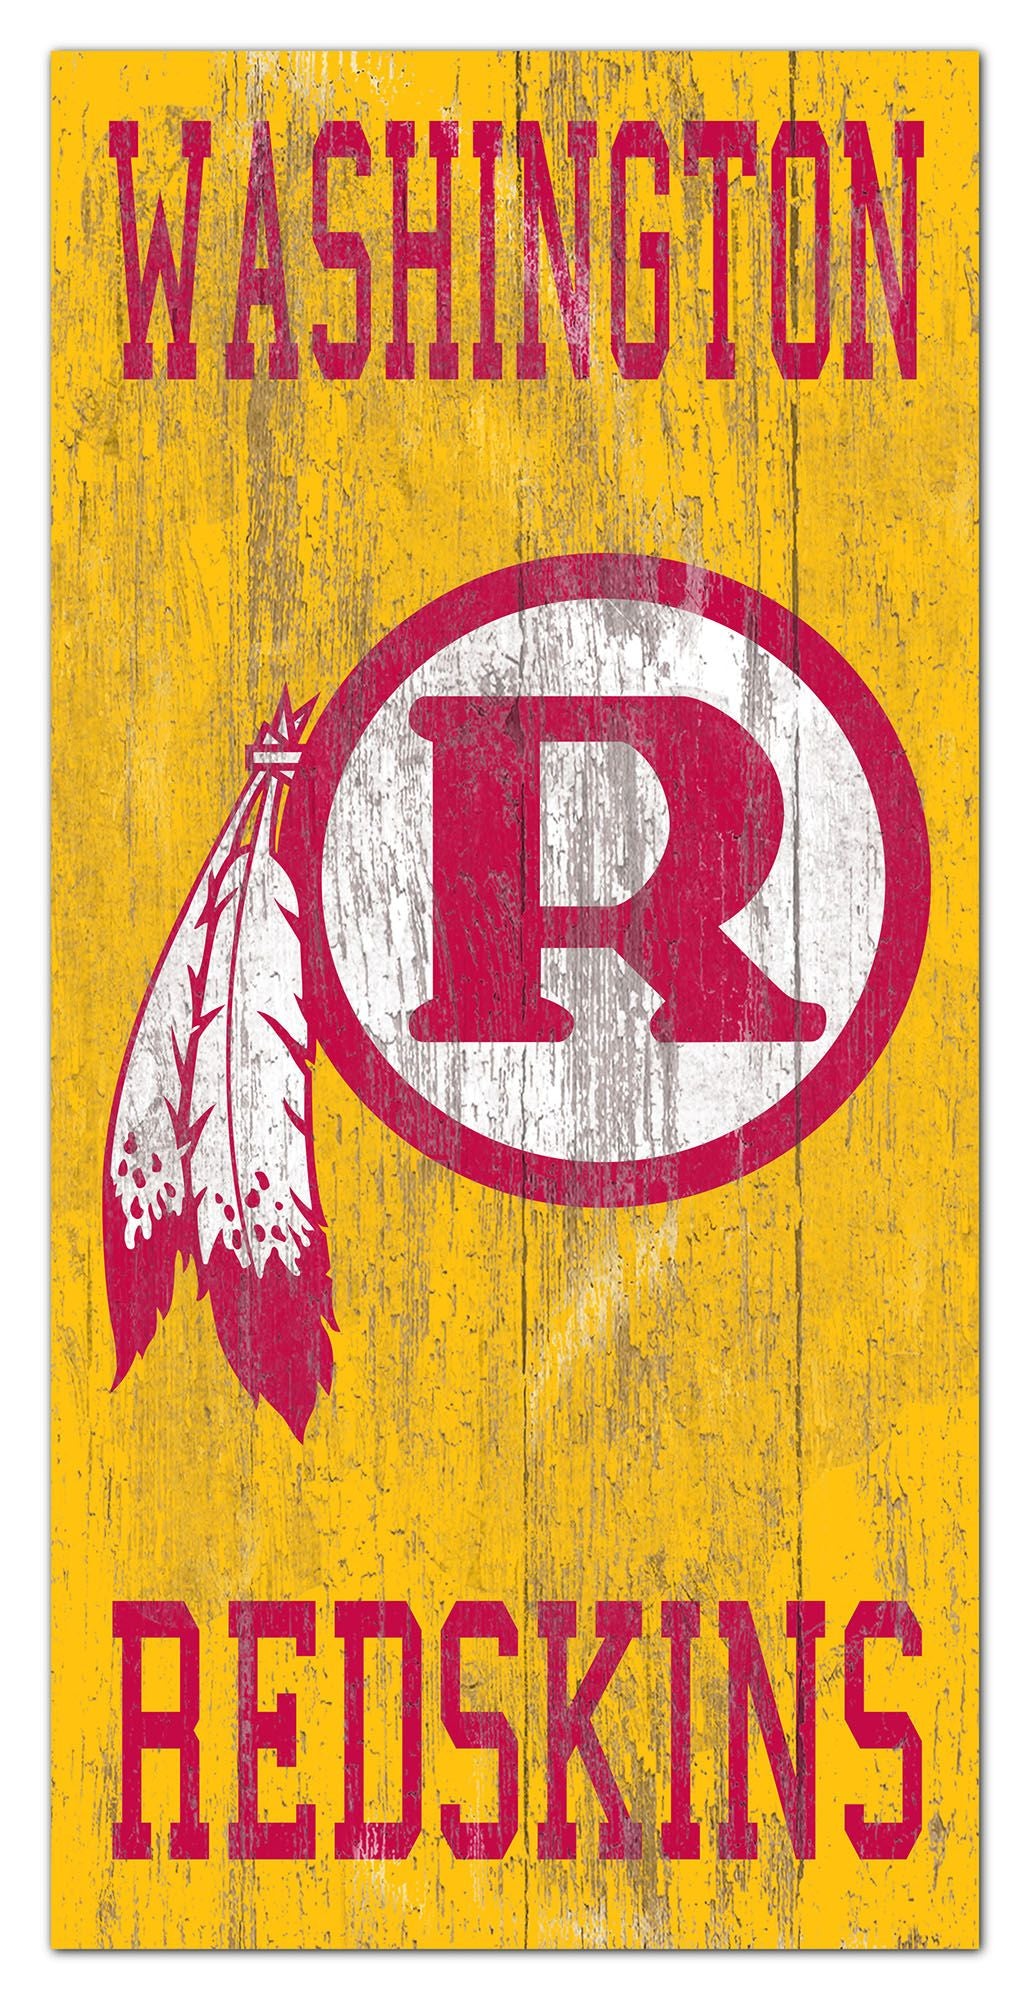 Washington Commanders Heritage Logo w/ Team Name 6" x 12" Distressed Sign by Fan Creations